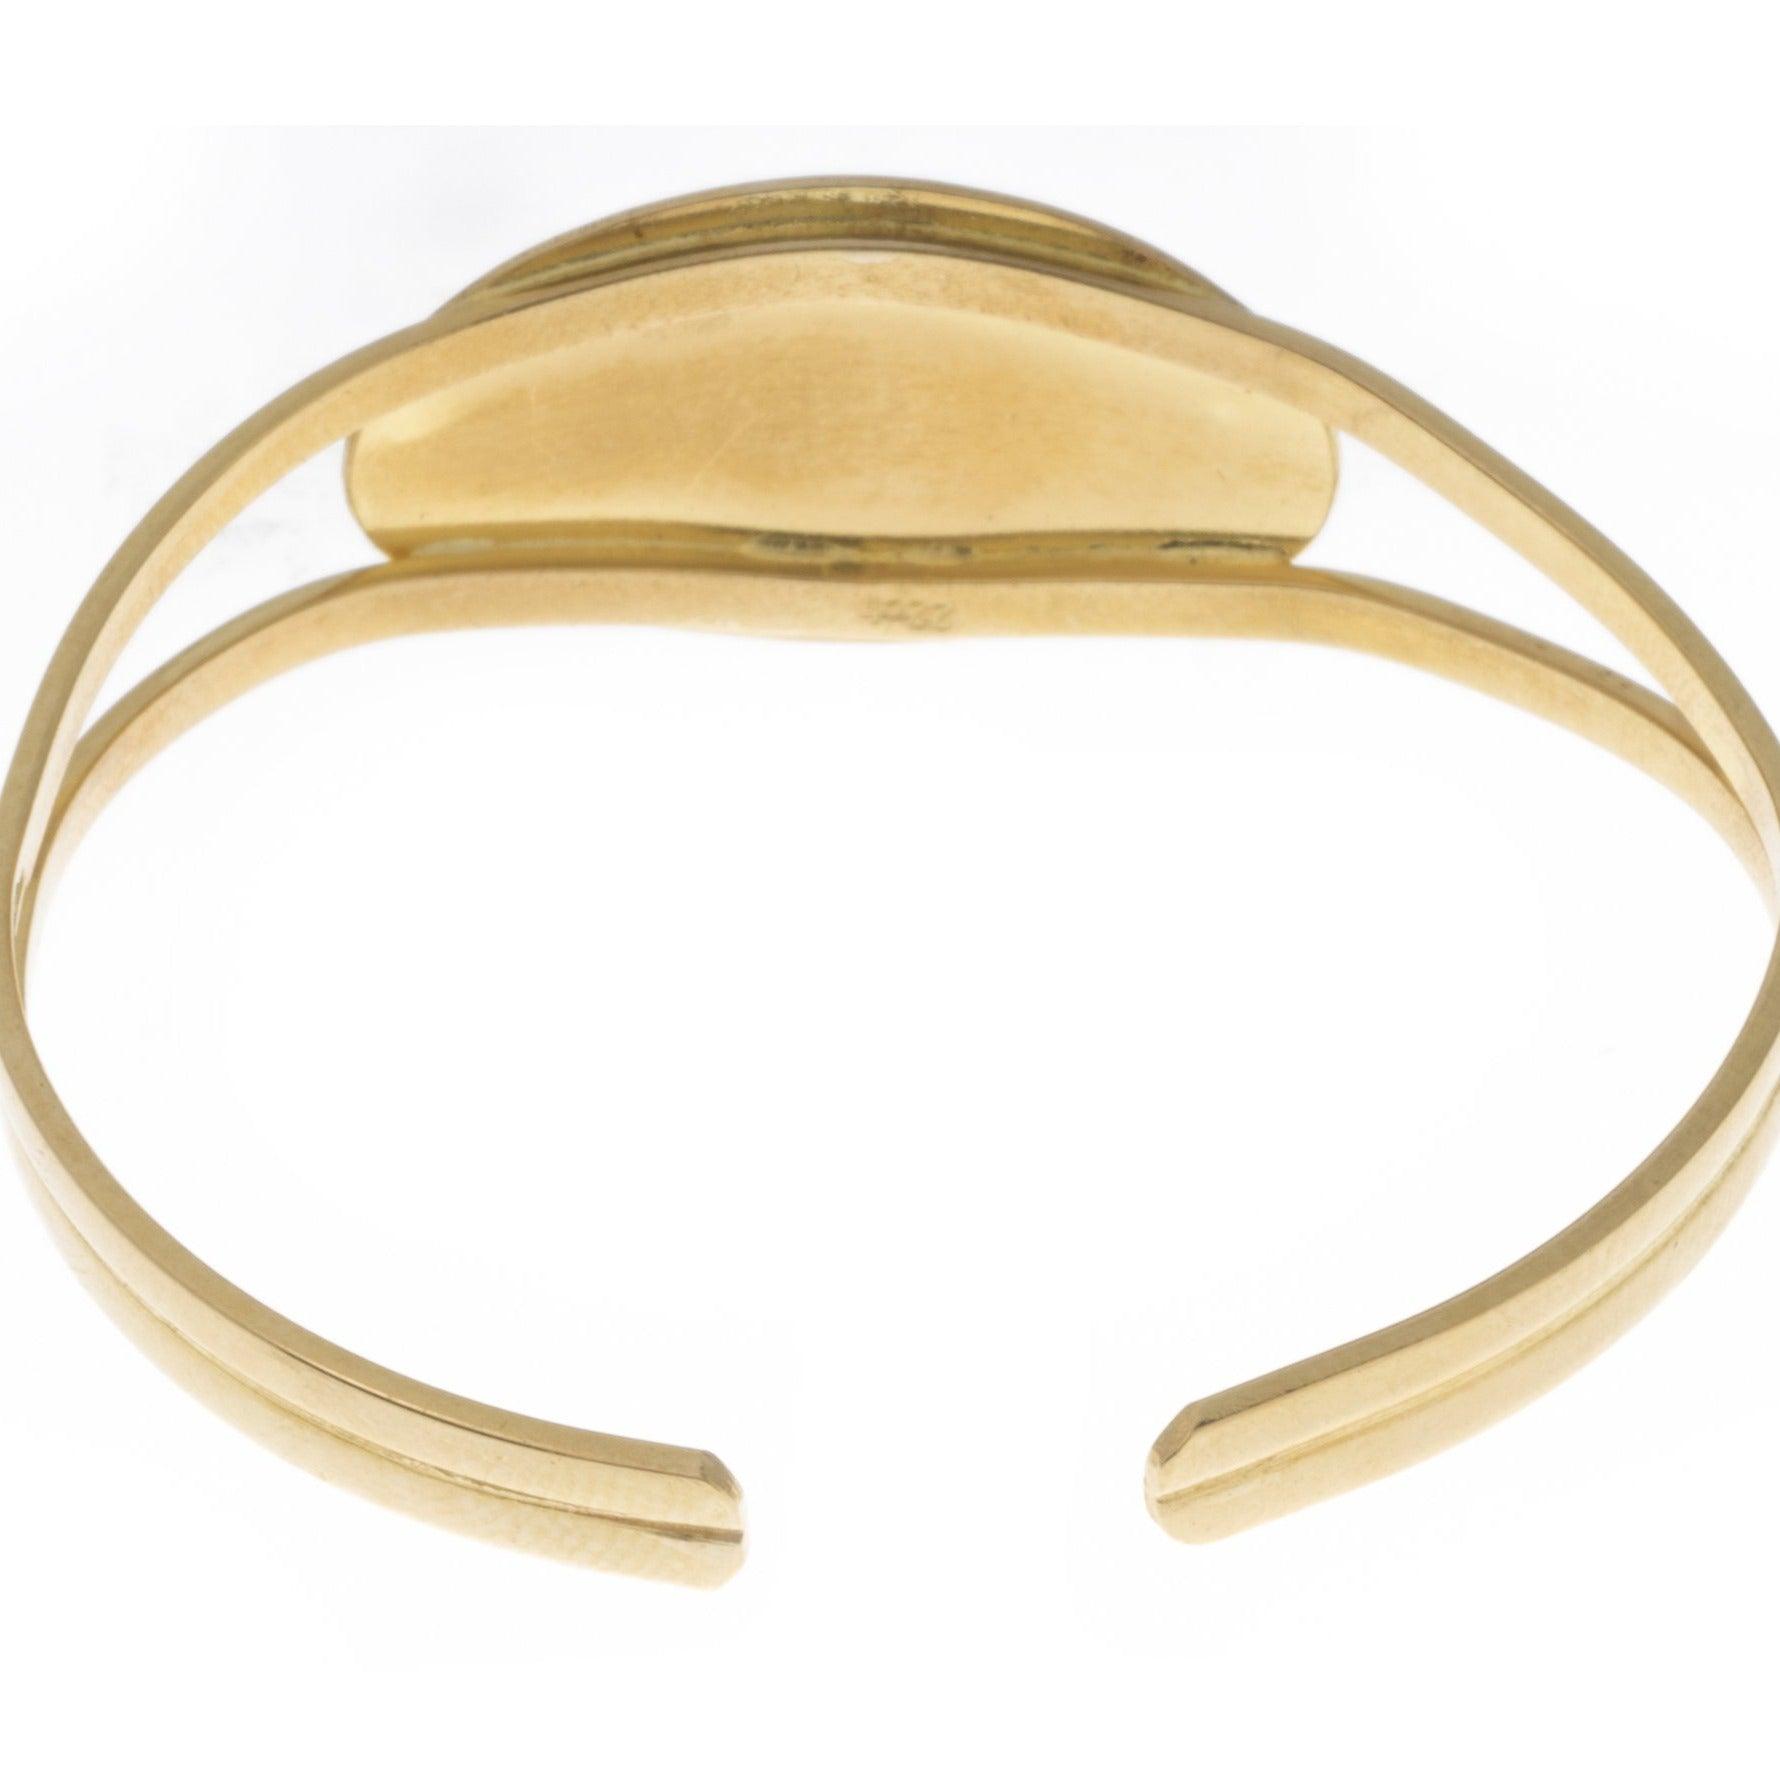 22ct Gold Openable Children's ID Style Bangle (10.4g) CB-7329 - Minar Jewellers